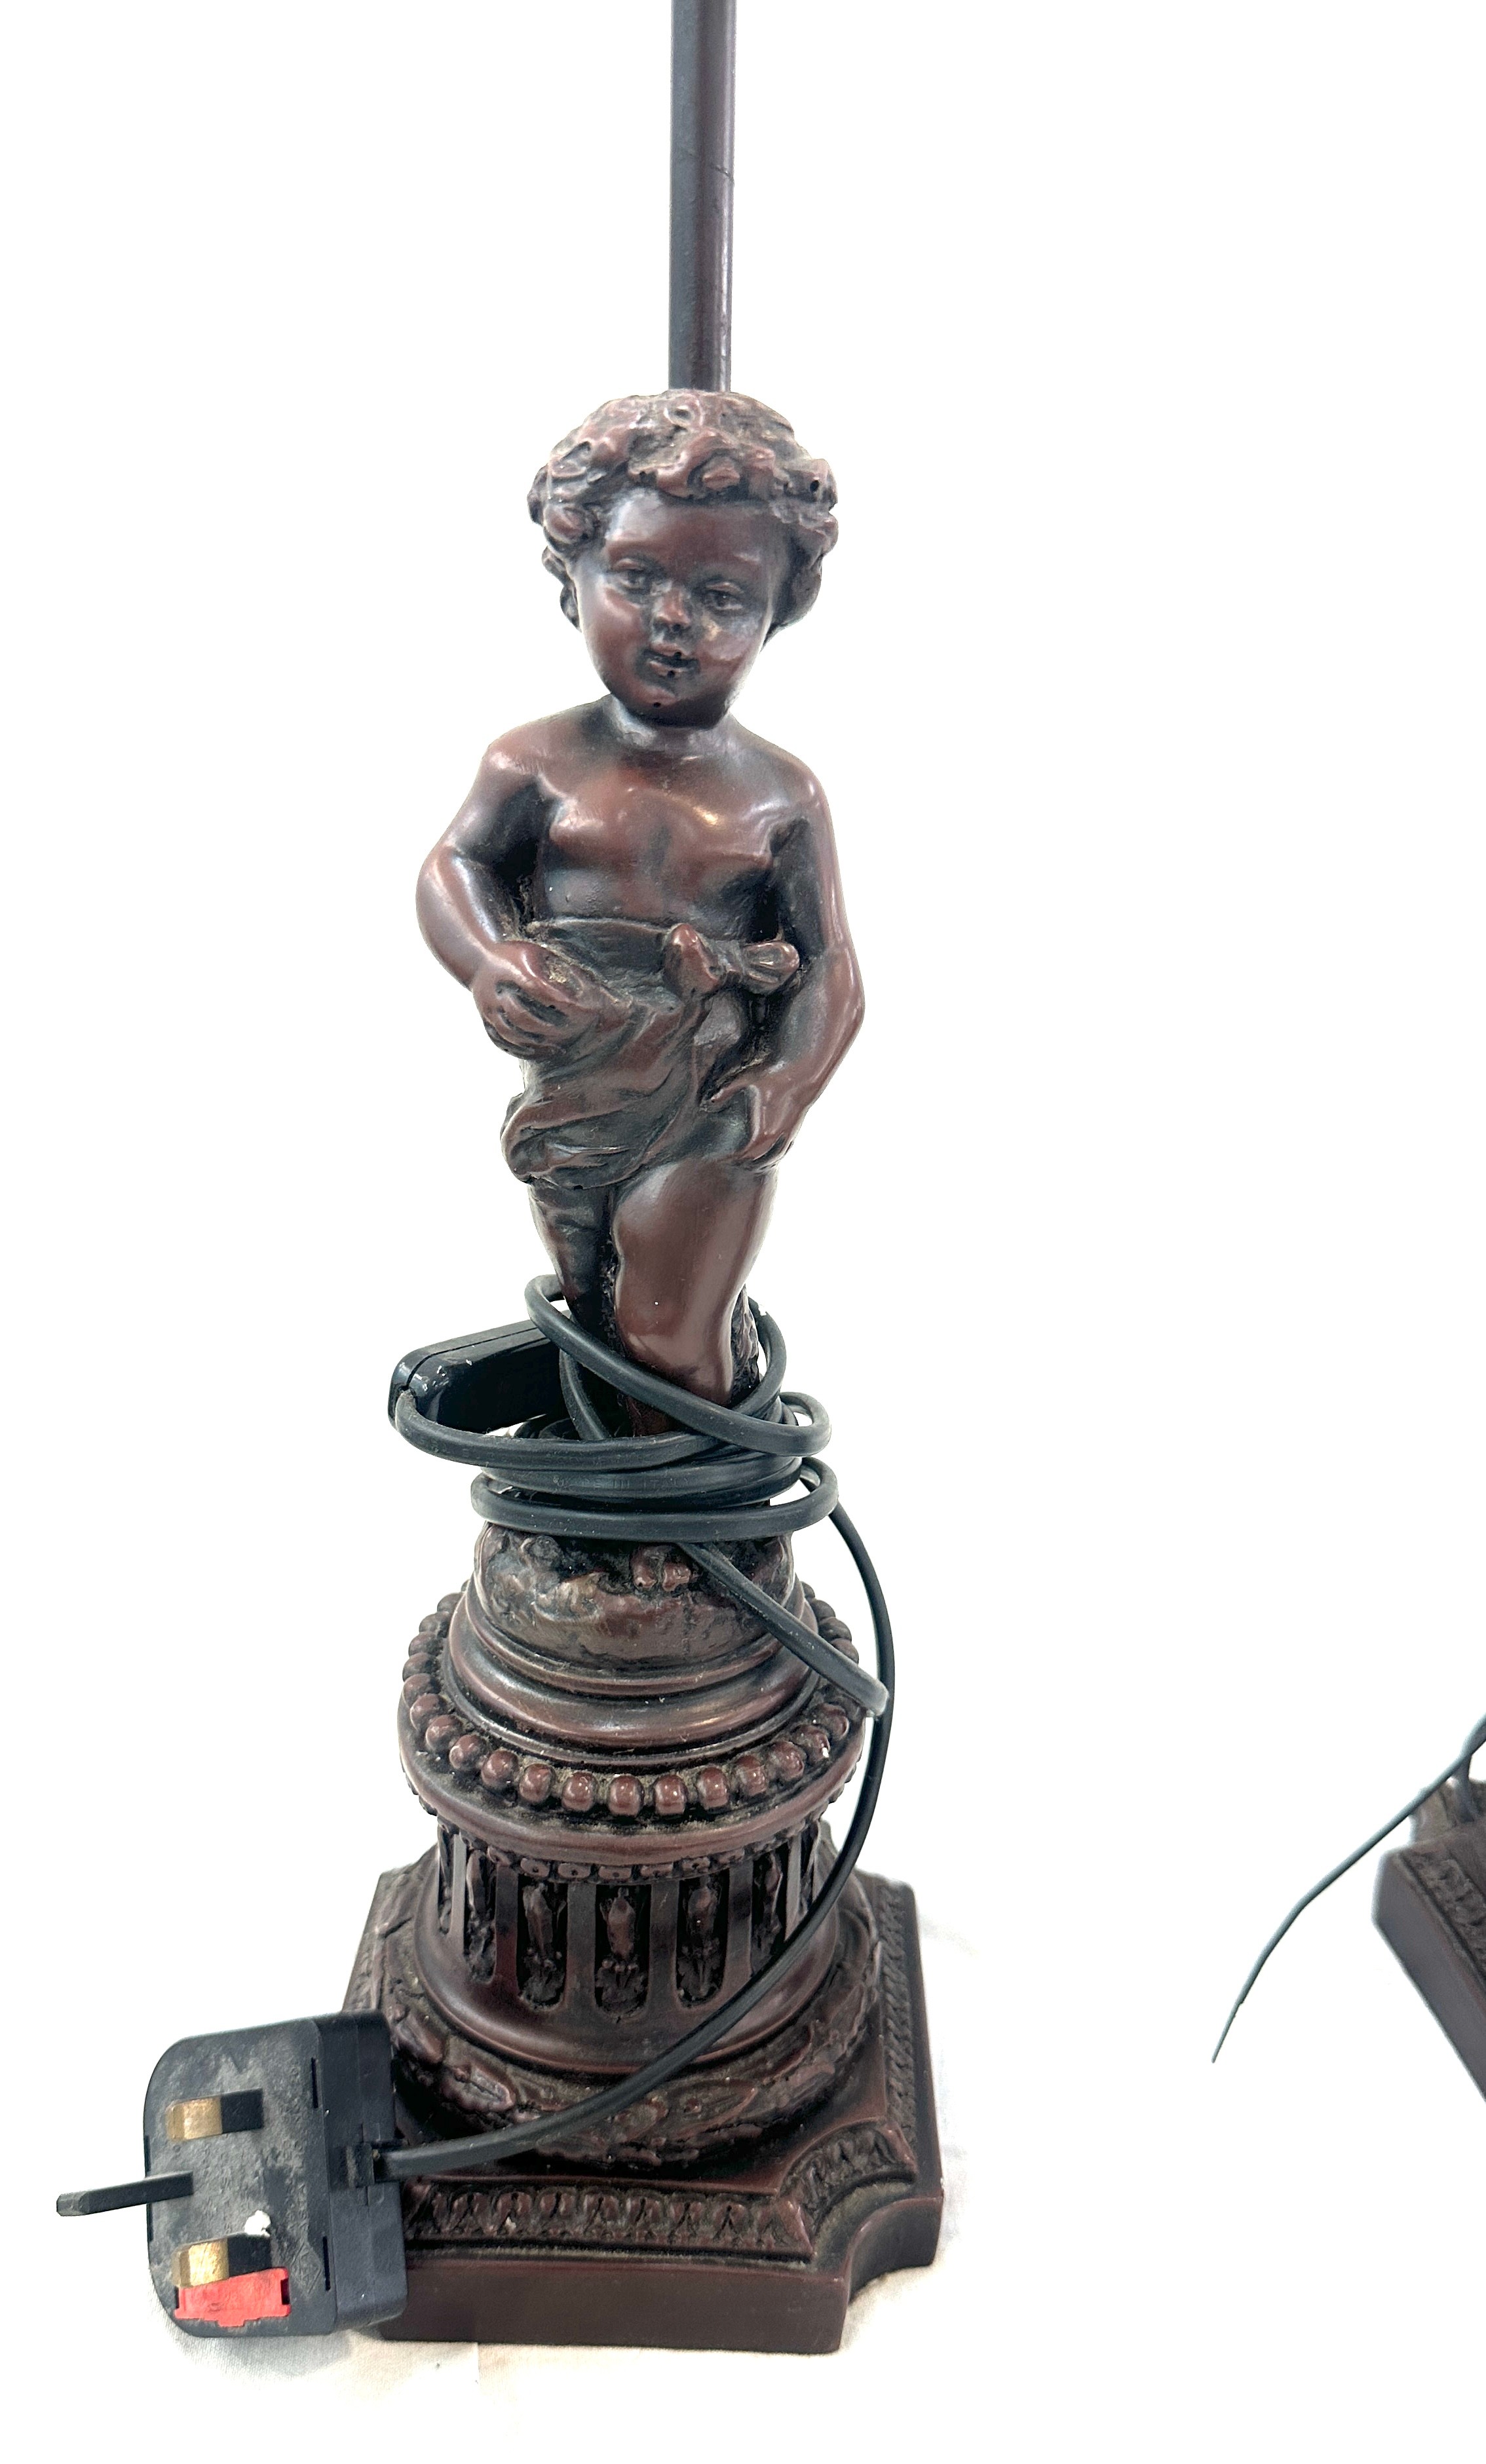 Pair of art deco style cherub lamps, untested 22 inches tall - Image 2 of 3